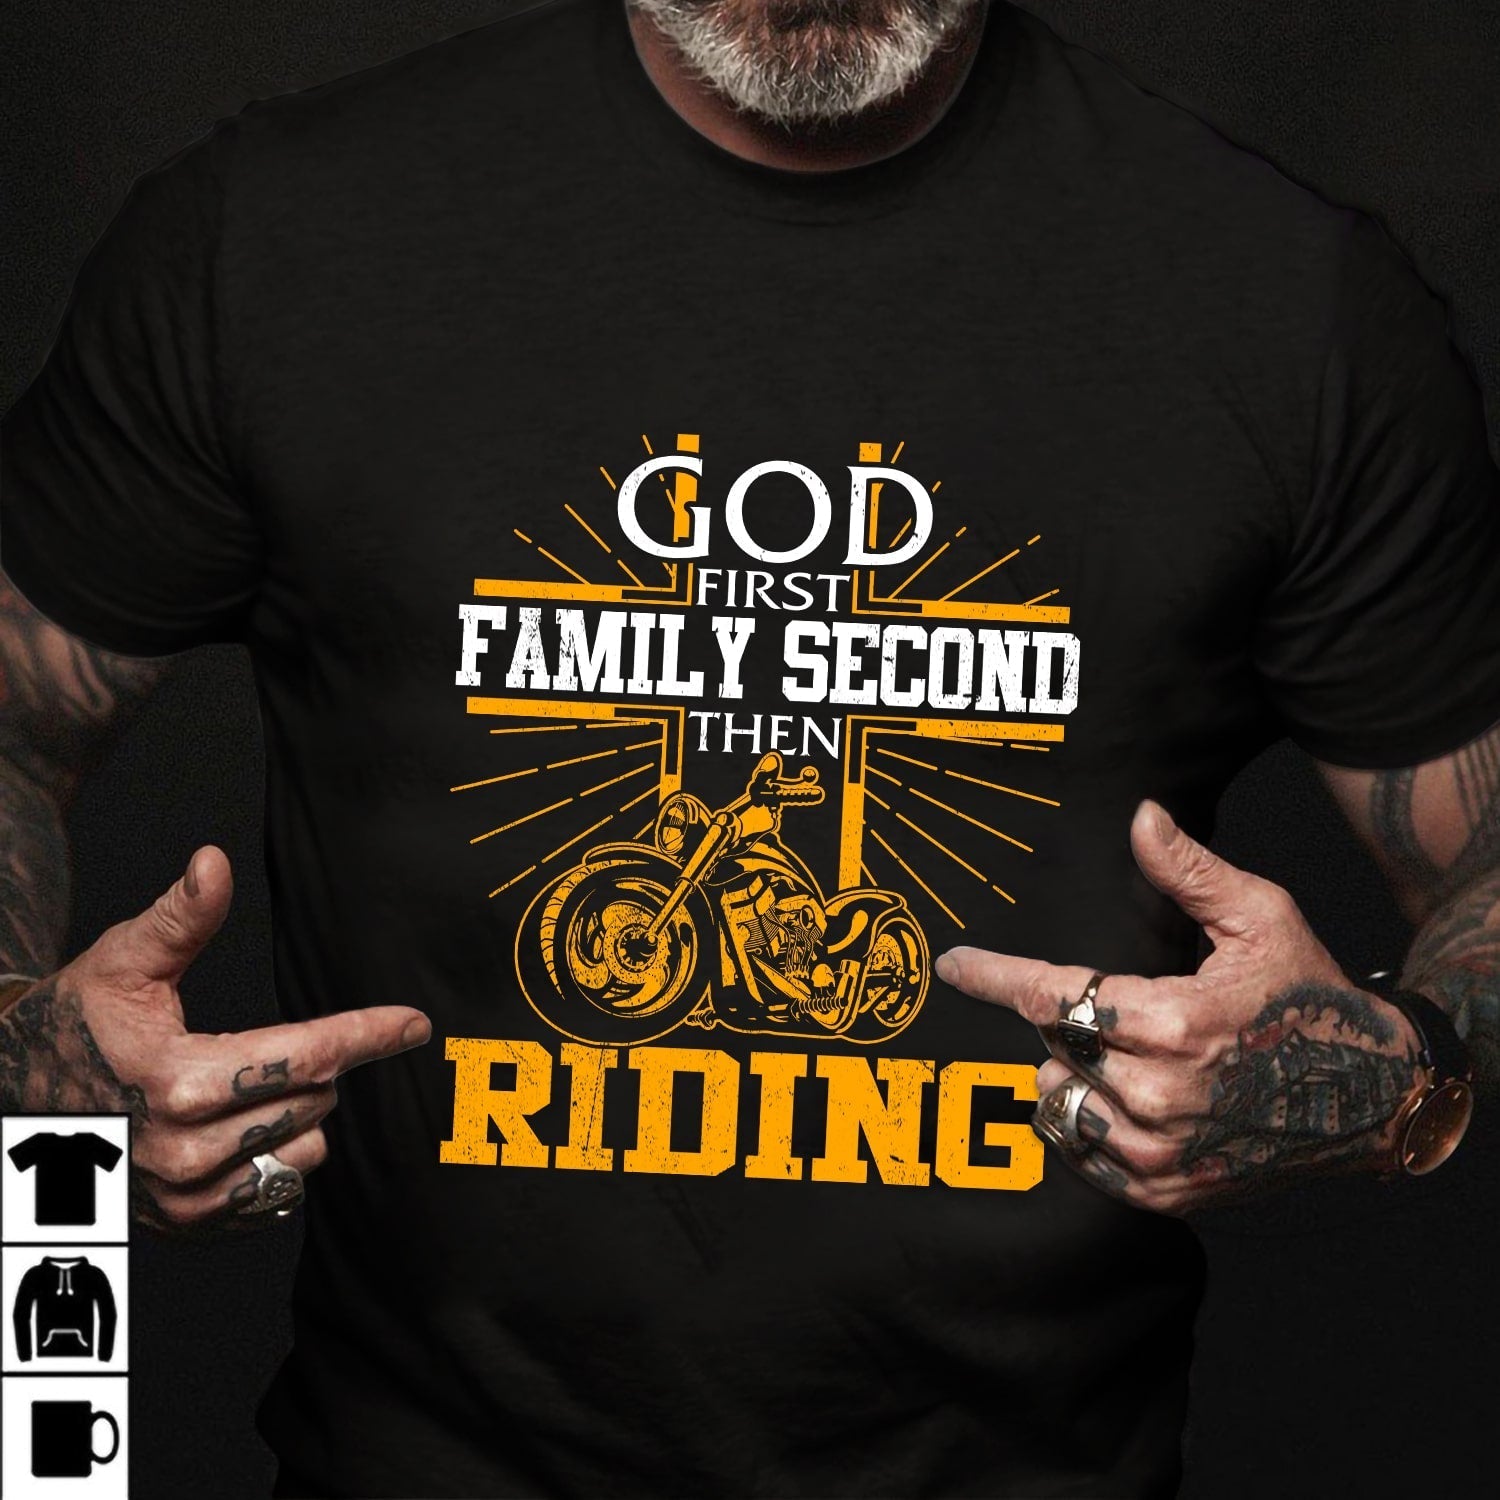 Riding – God first Family second then Riding – T Shirt